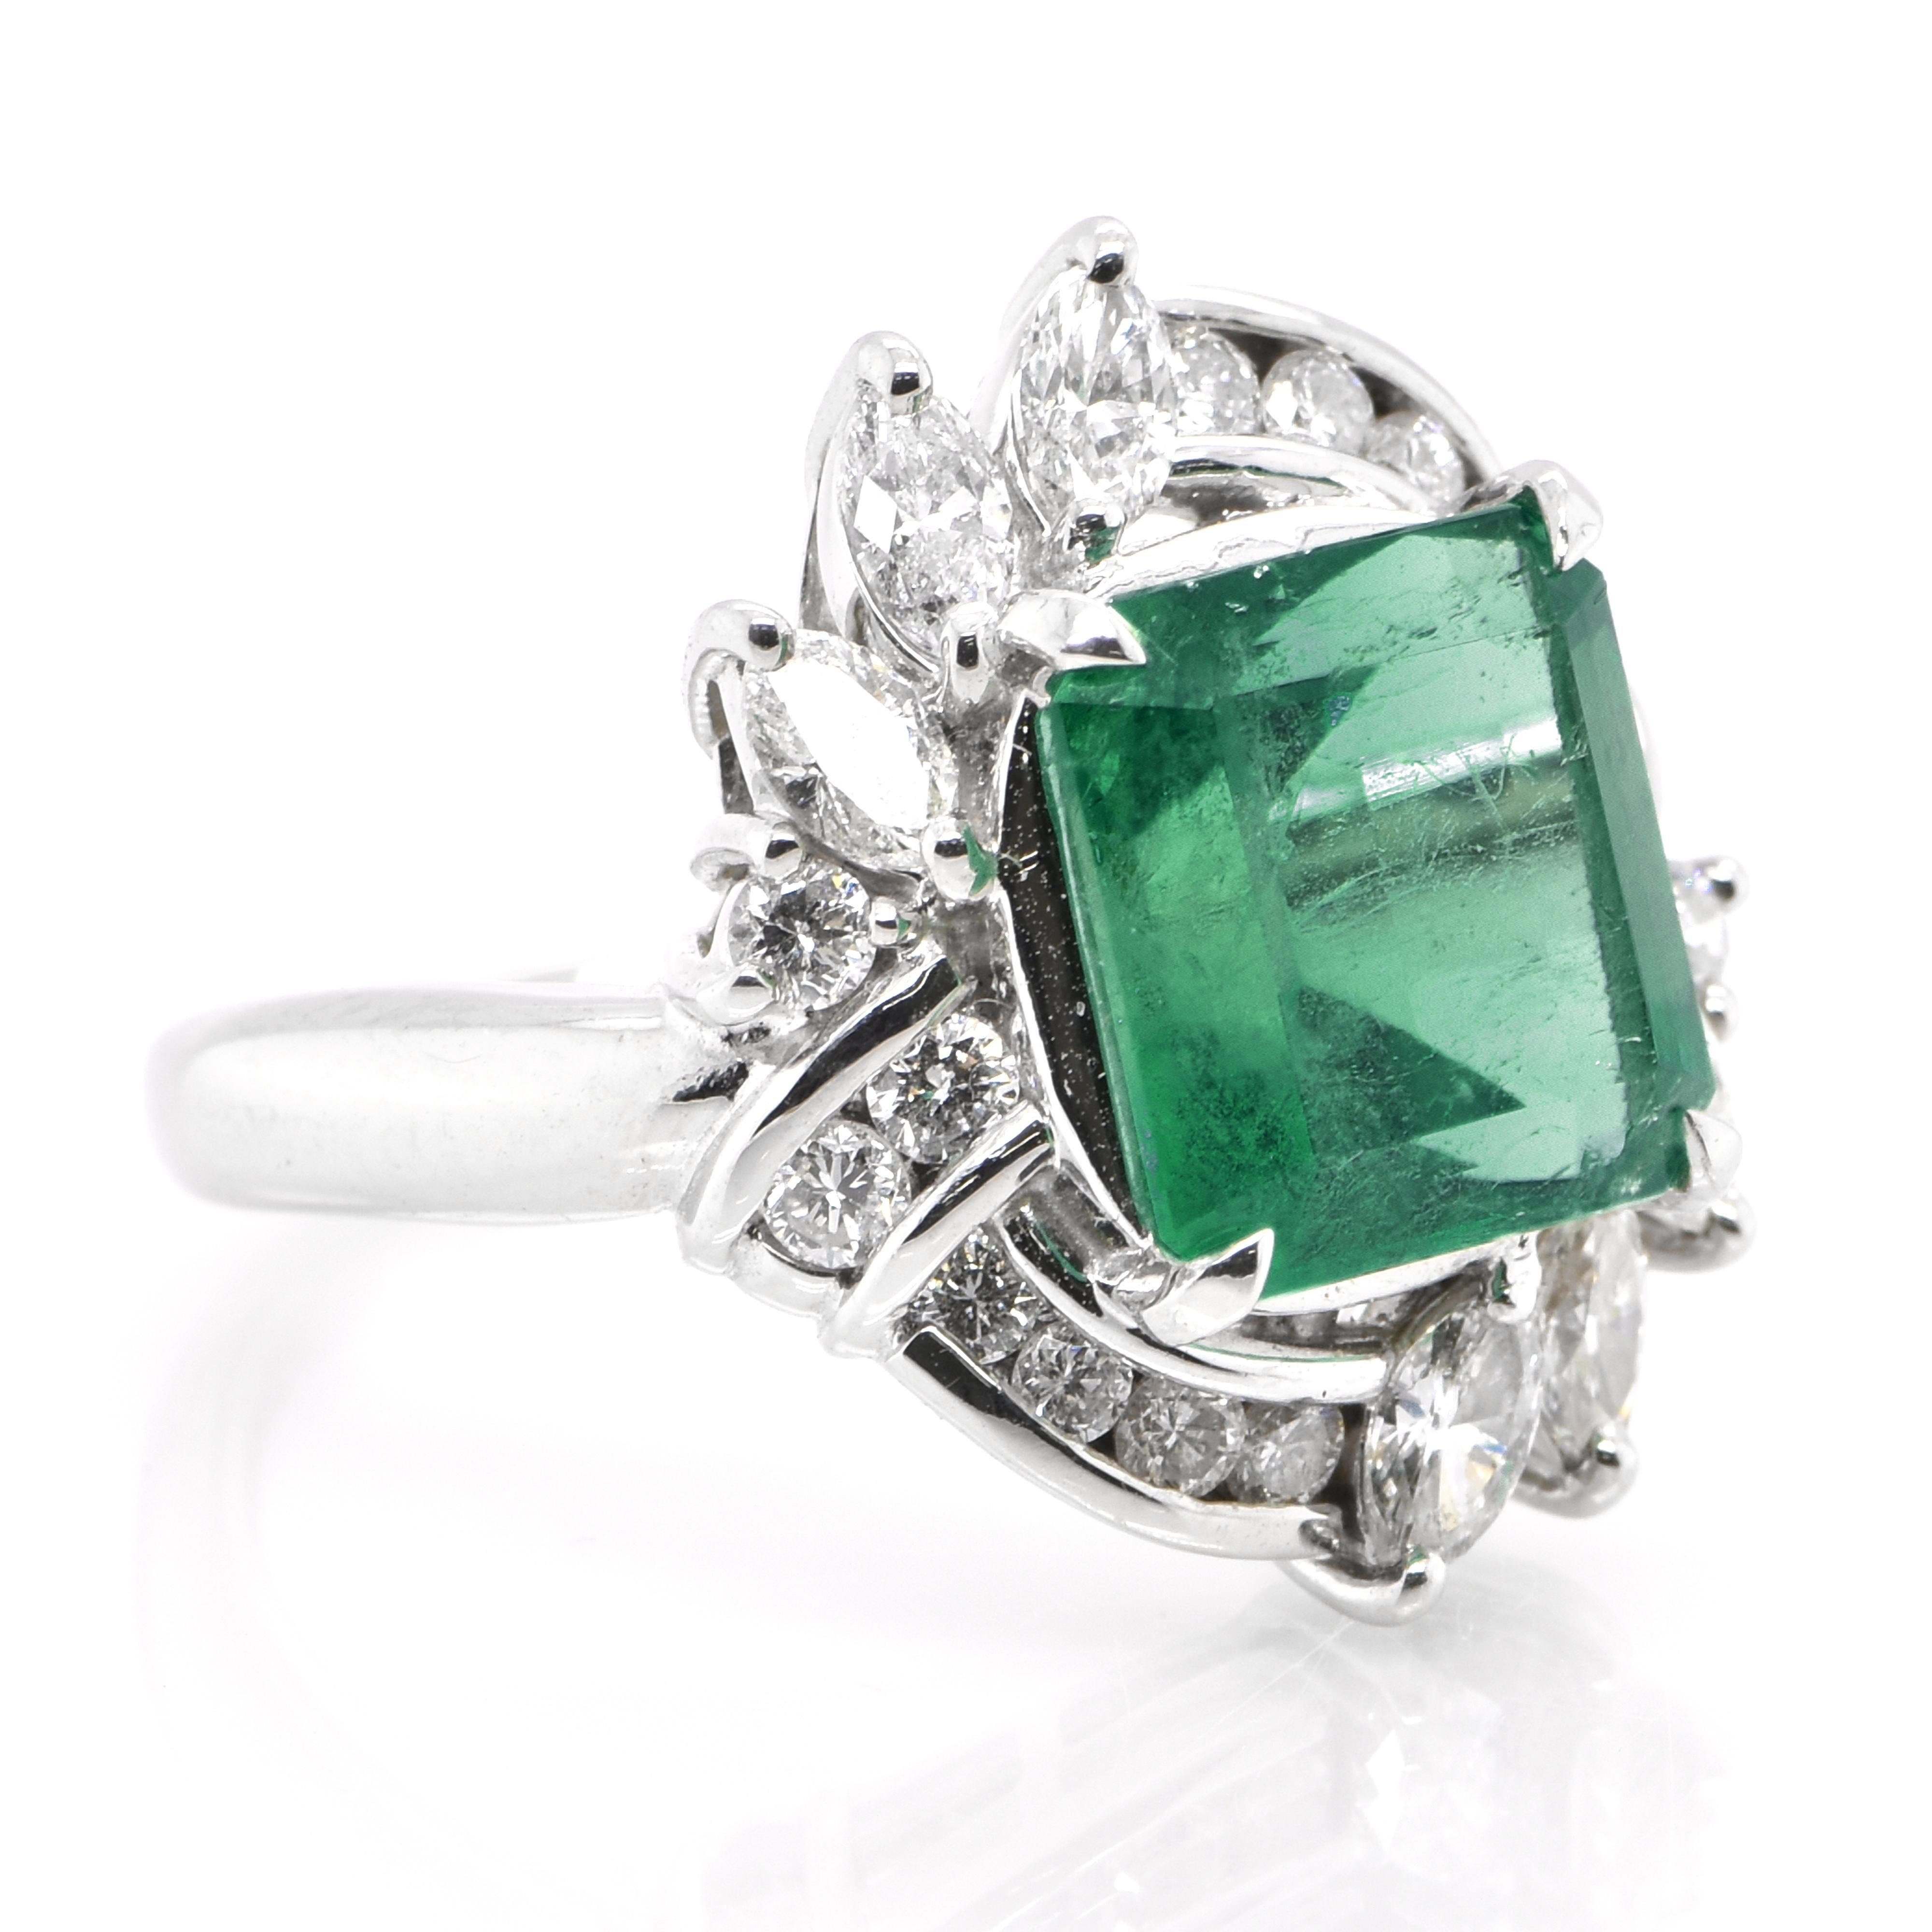 A stunning Estate ring featuring a 3.41 Carat Natural Emerald and 0.85 Carats of Diamond Accents set in Platinum. People have admired emerald’s green for thousands of years. Emeralds have always been associated with the lushest landscapes and the